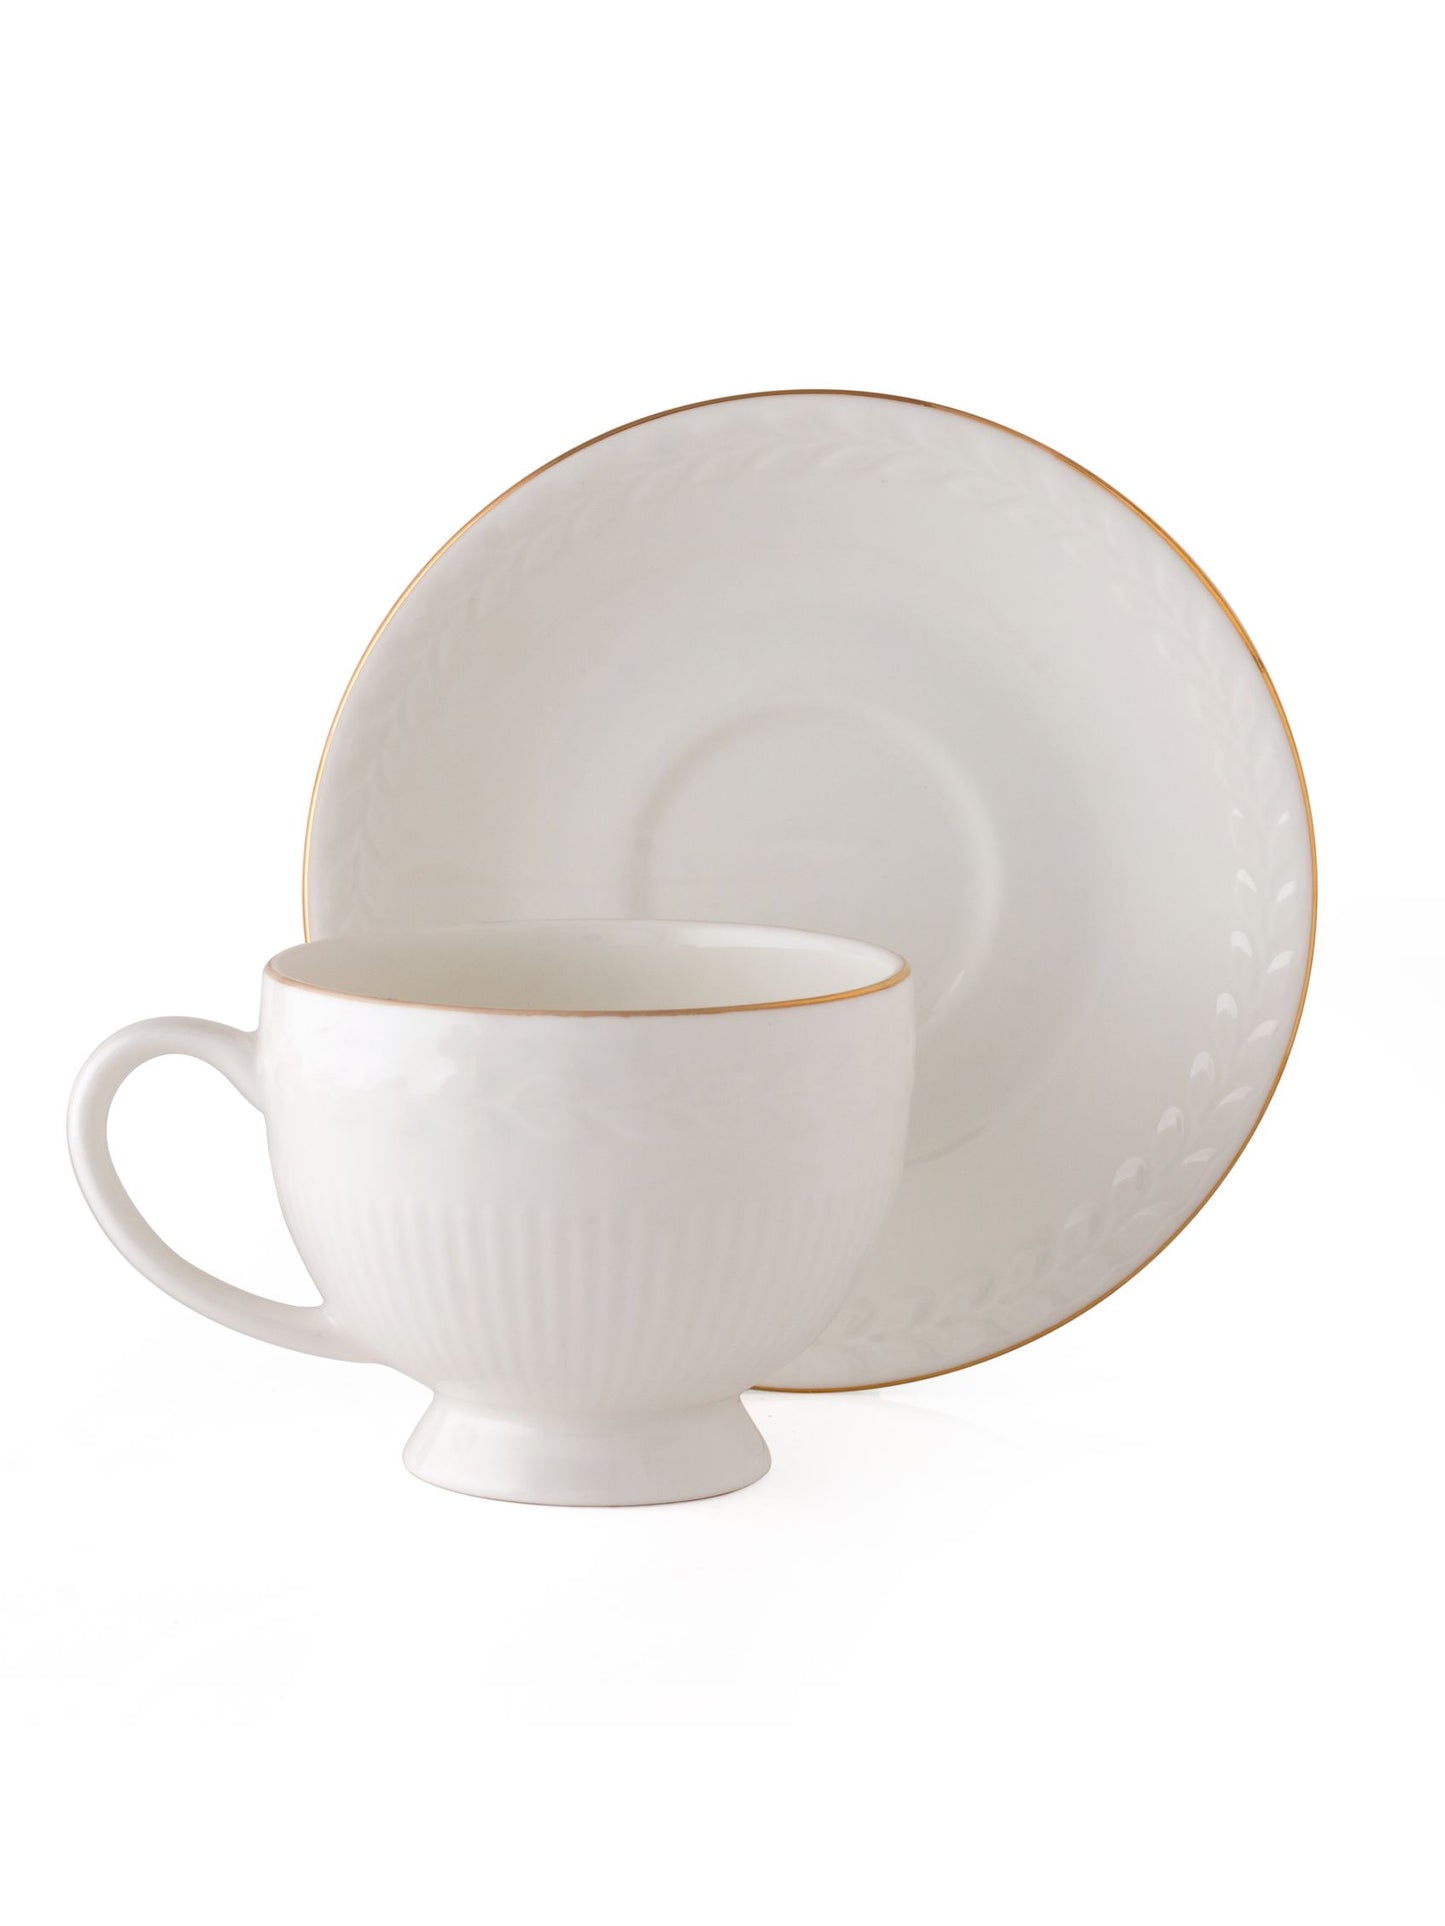 Snow Impression Cup & Saucer, 170ml, Set of 12 (6 Cups + 6 Saucers) (1101)